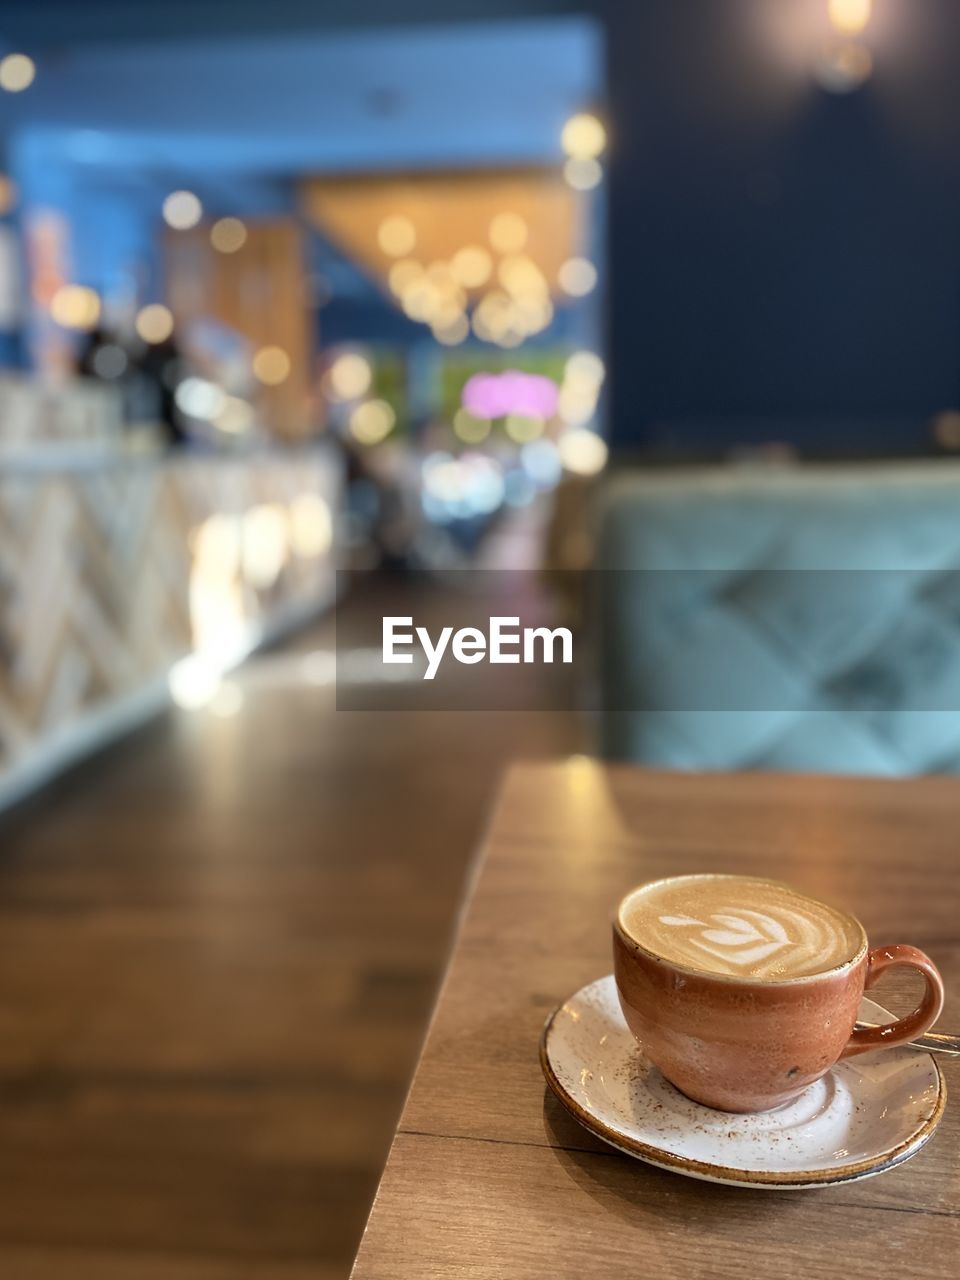 food and drink, coffee, drink, coffee cup, mug, cup, cafe, table, refreshment, focus on foreground, restaurant, business, cappuccino, hot drink, saucer, indoors, crockery, latte, no people, meal, illuminated, wood, still life, food, coffee shop, tableware, bar, selective focus